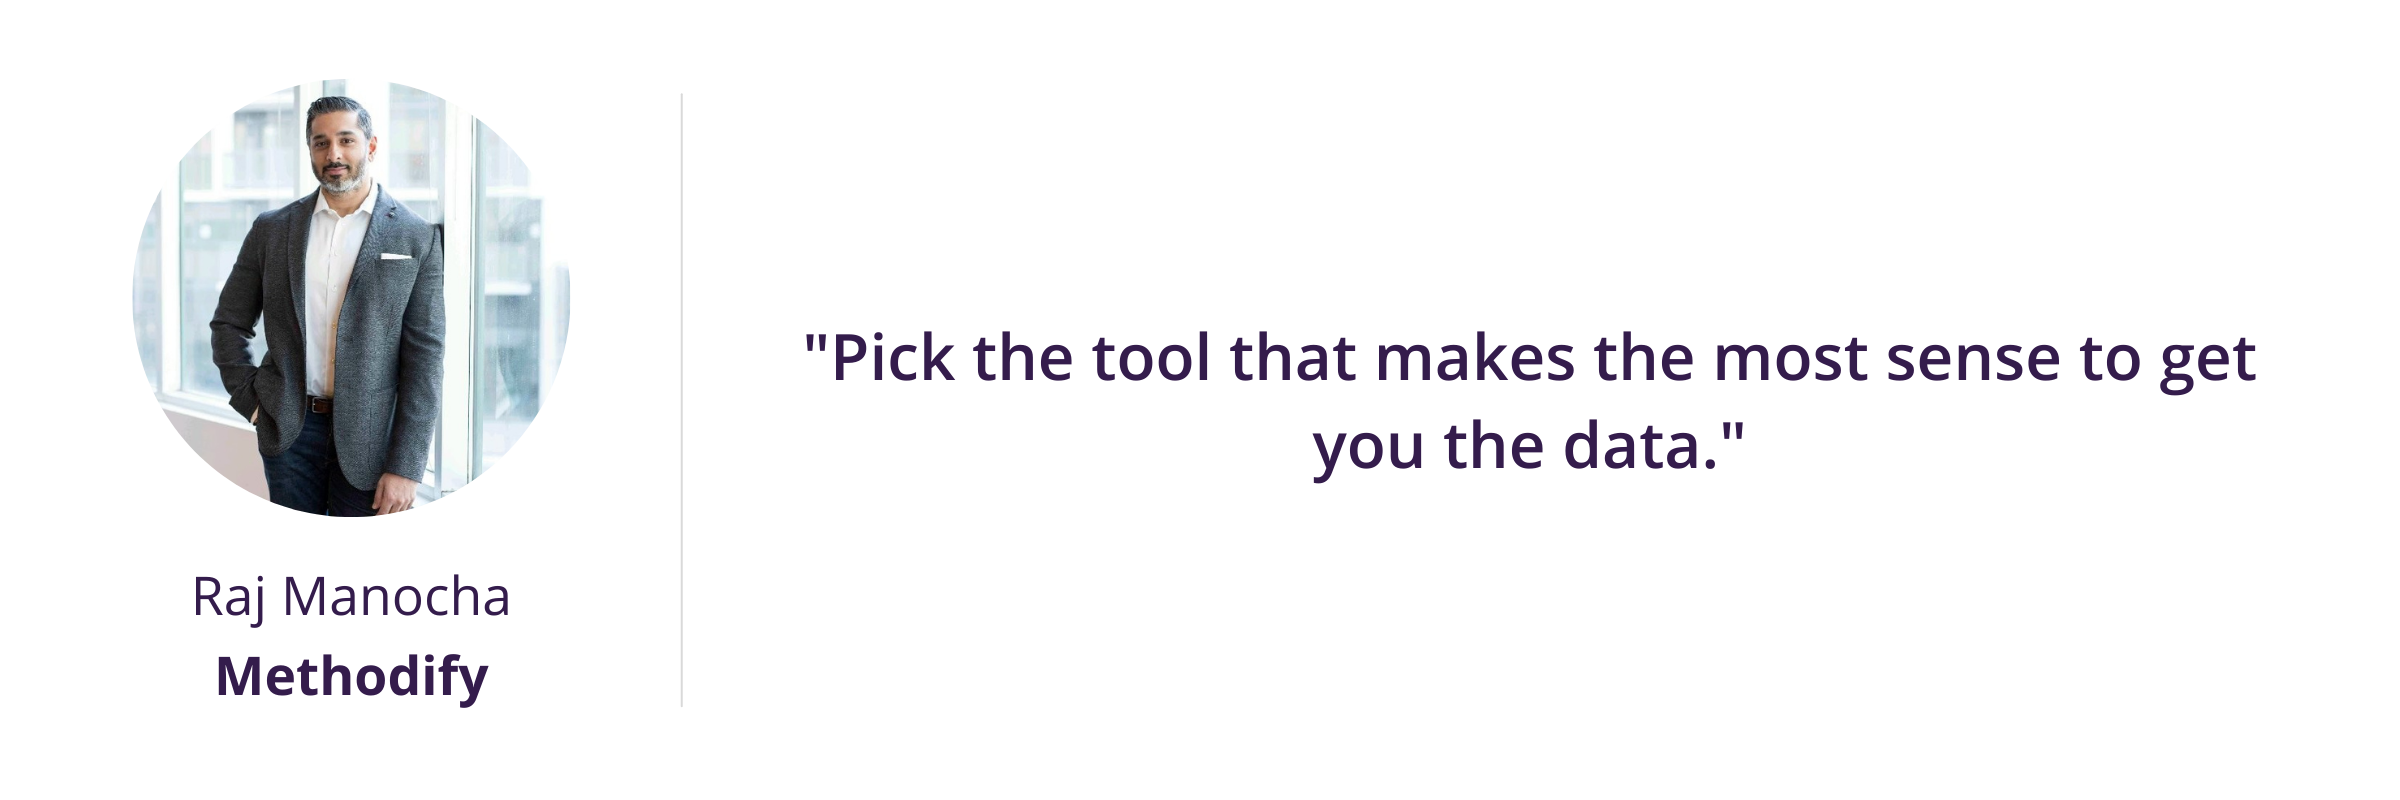 Pick the tool that makes the most sense to get you the data. 